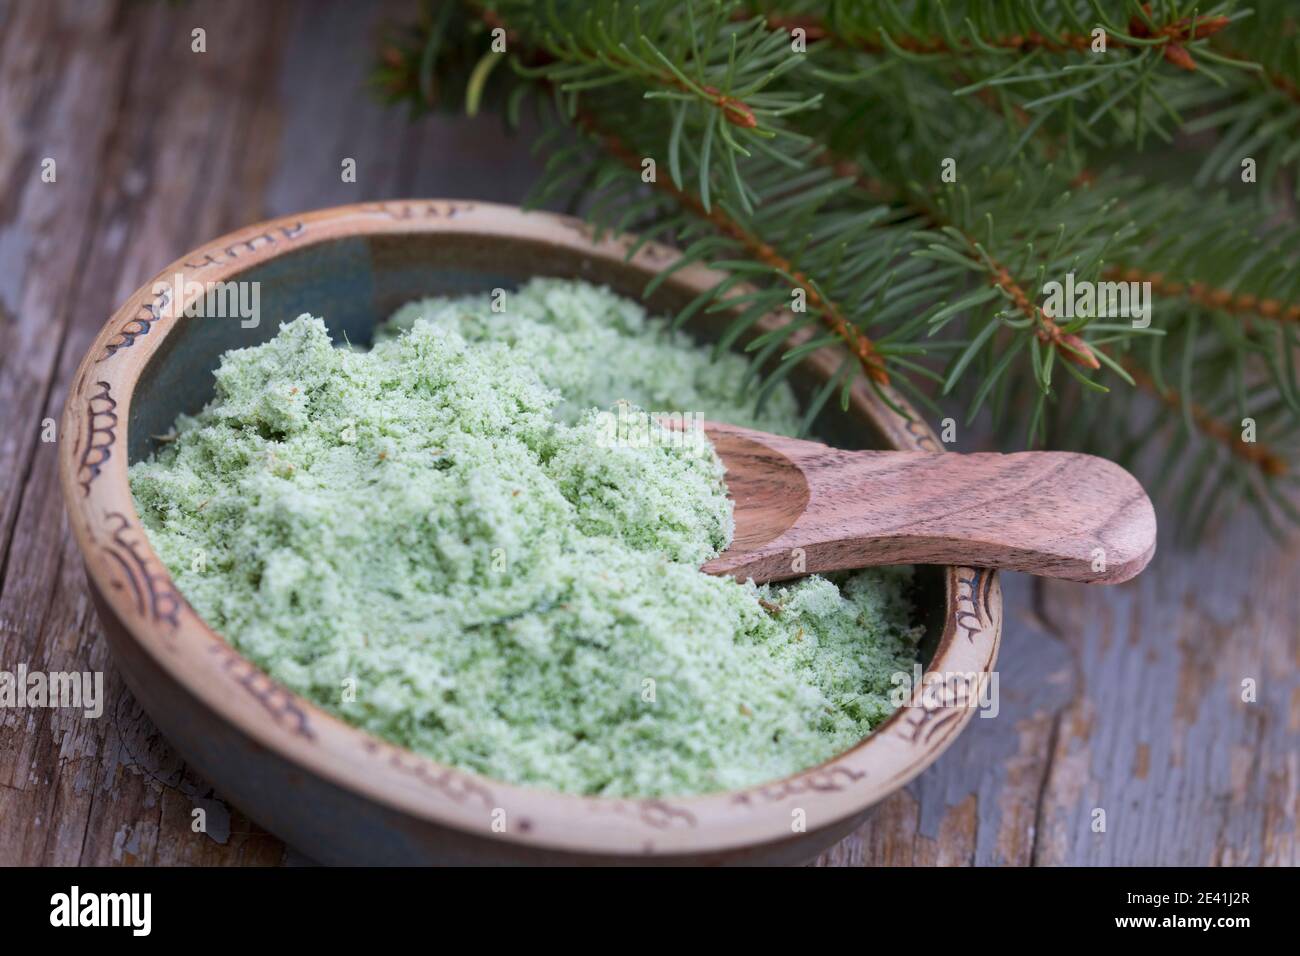 Norway spruce (Picea abies), selfmade spruce salt, Germany Stock Photo